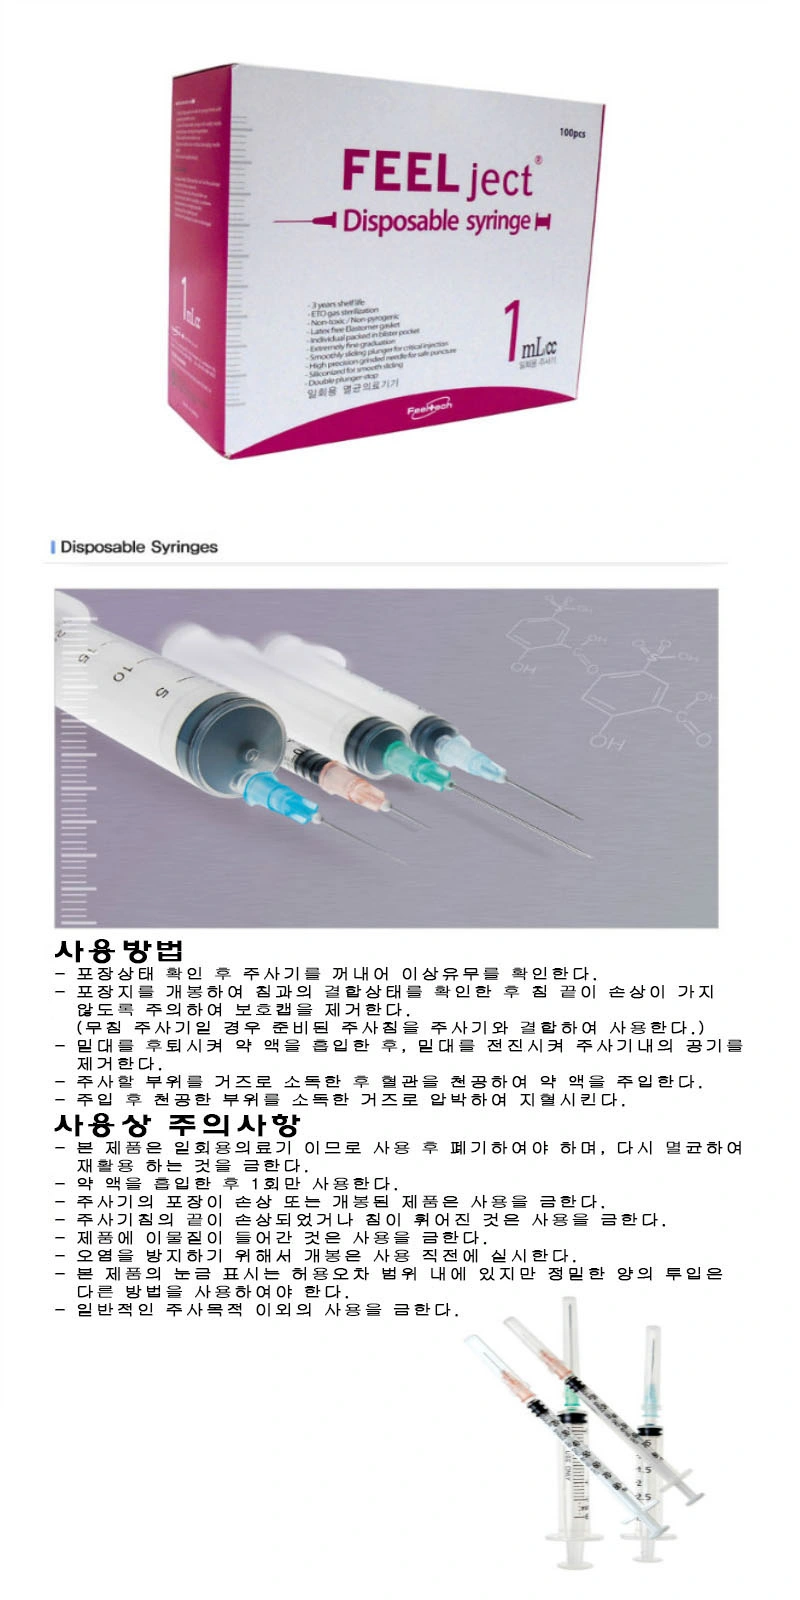 Disposable Vaccine Syringe Medica_L Syringe for Vaccines with Needle safety Syringe